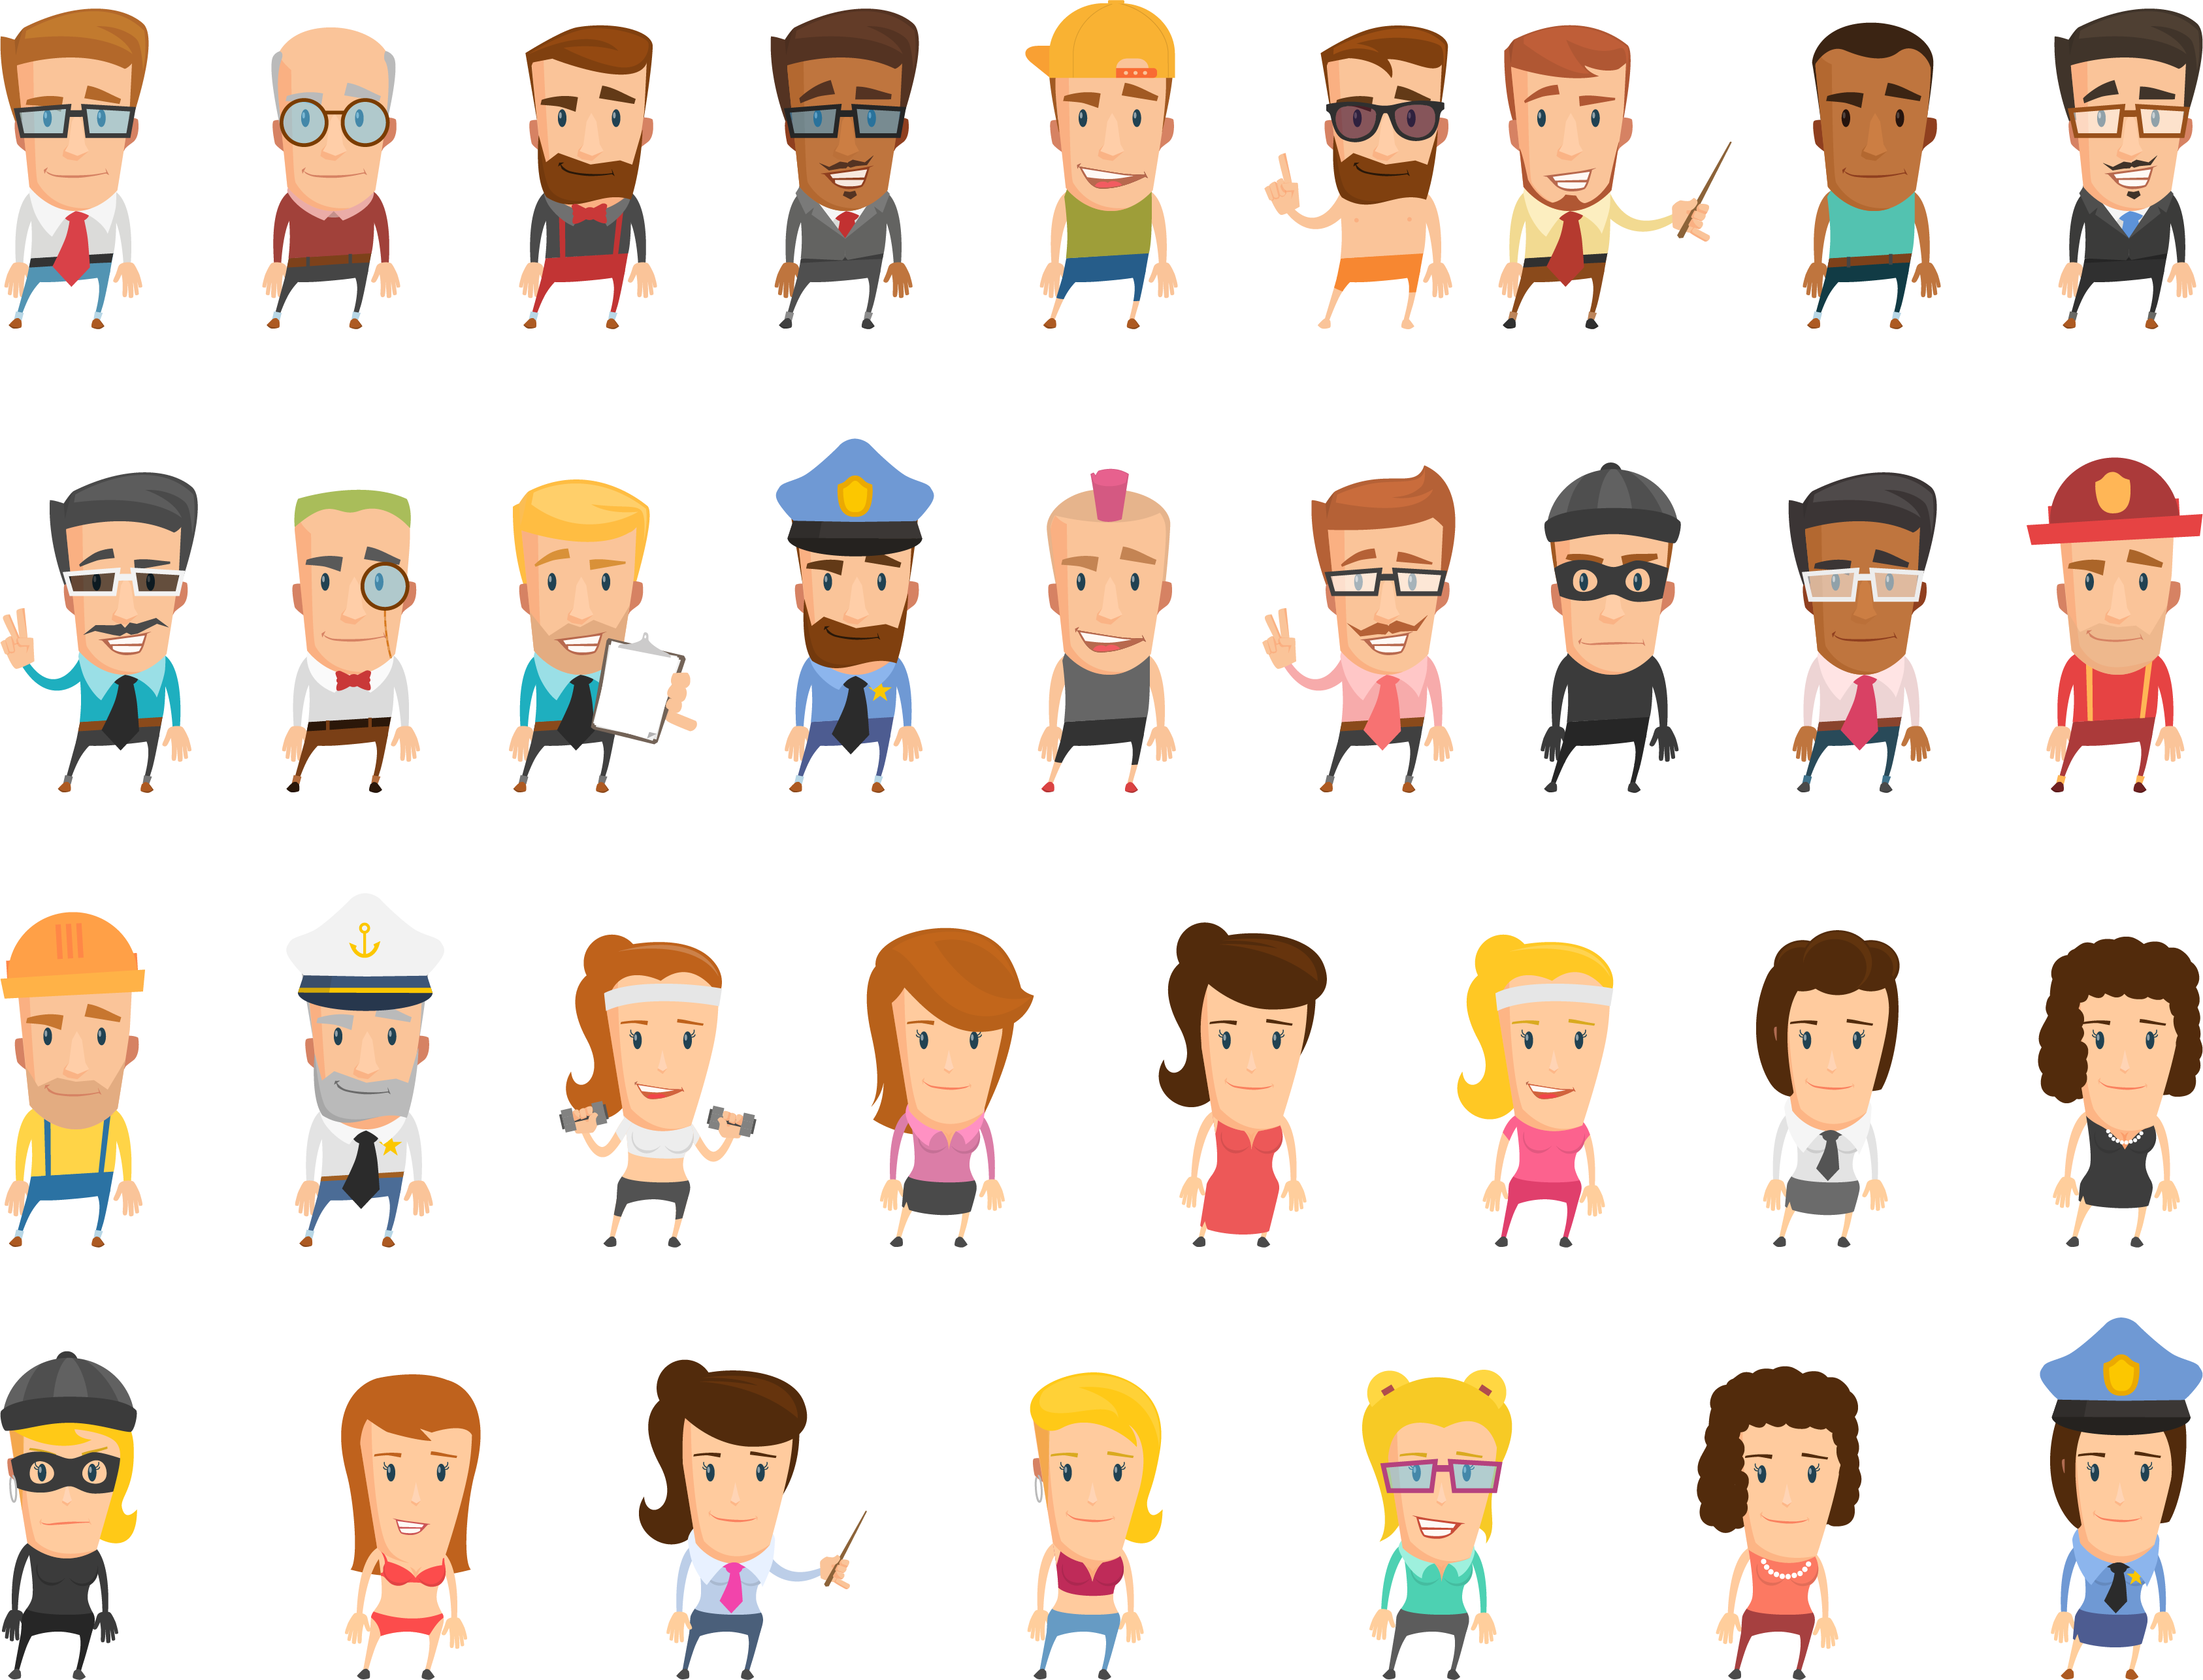 36 different male and female cartoon characters arranged in nine columns